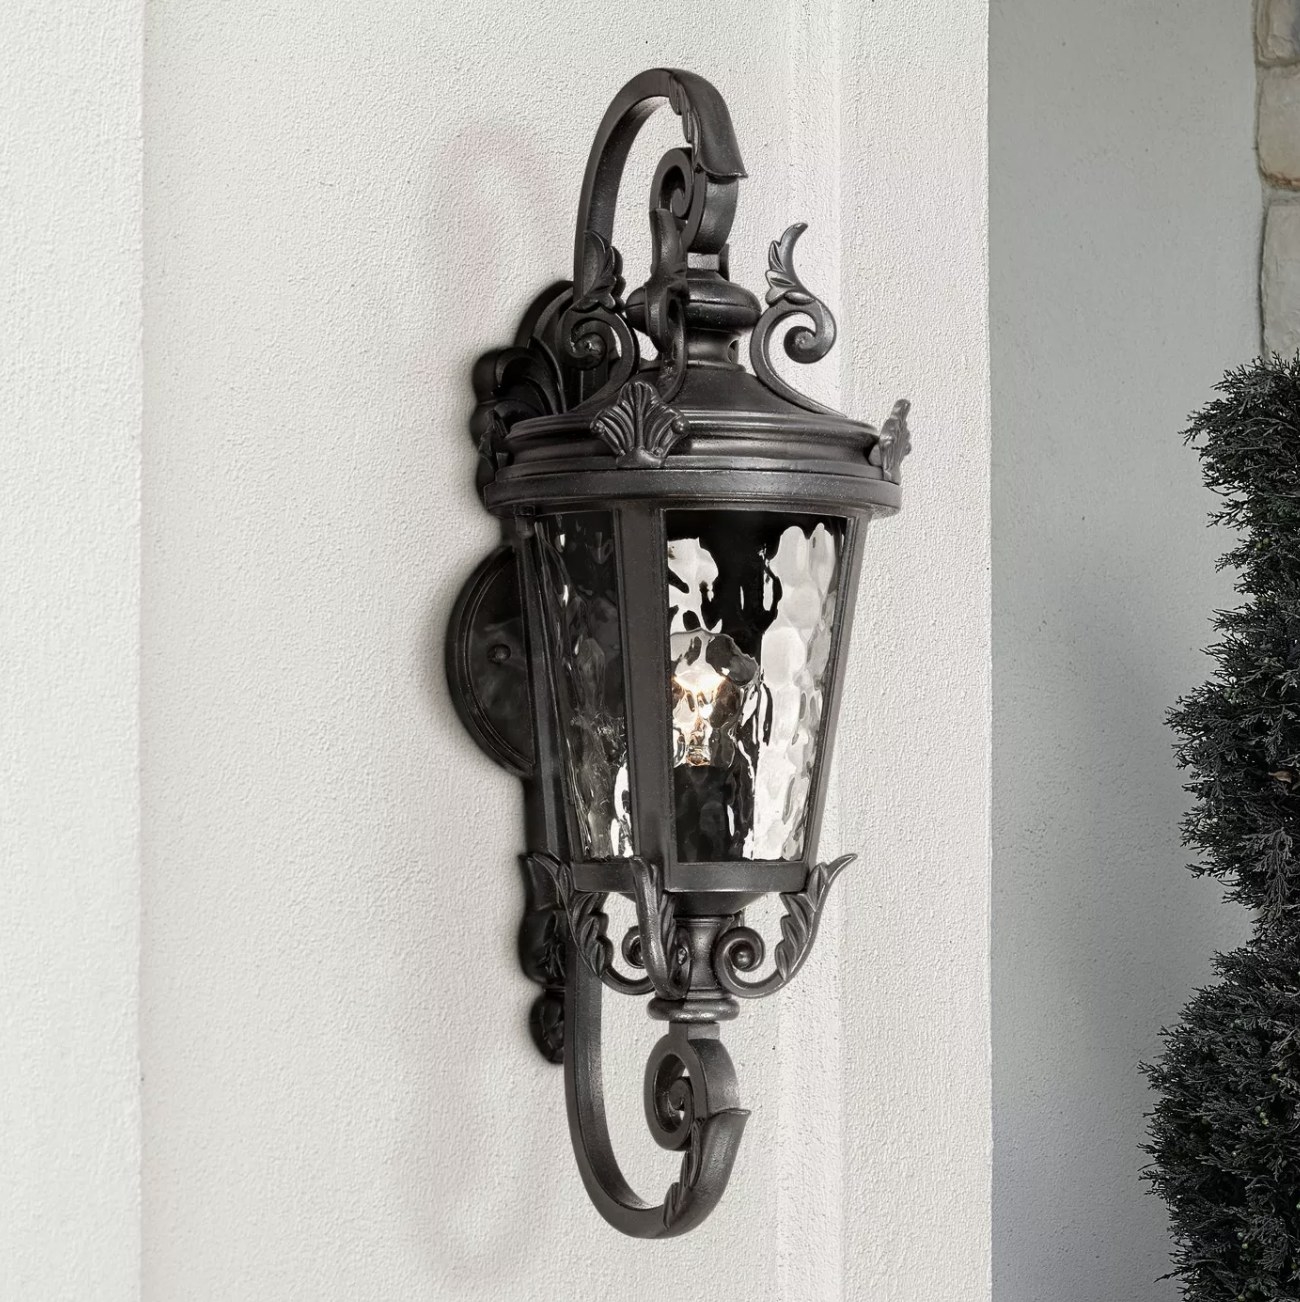 A black iron light fixture mounted on a wall